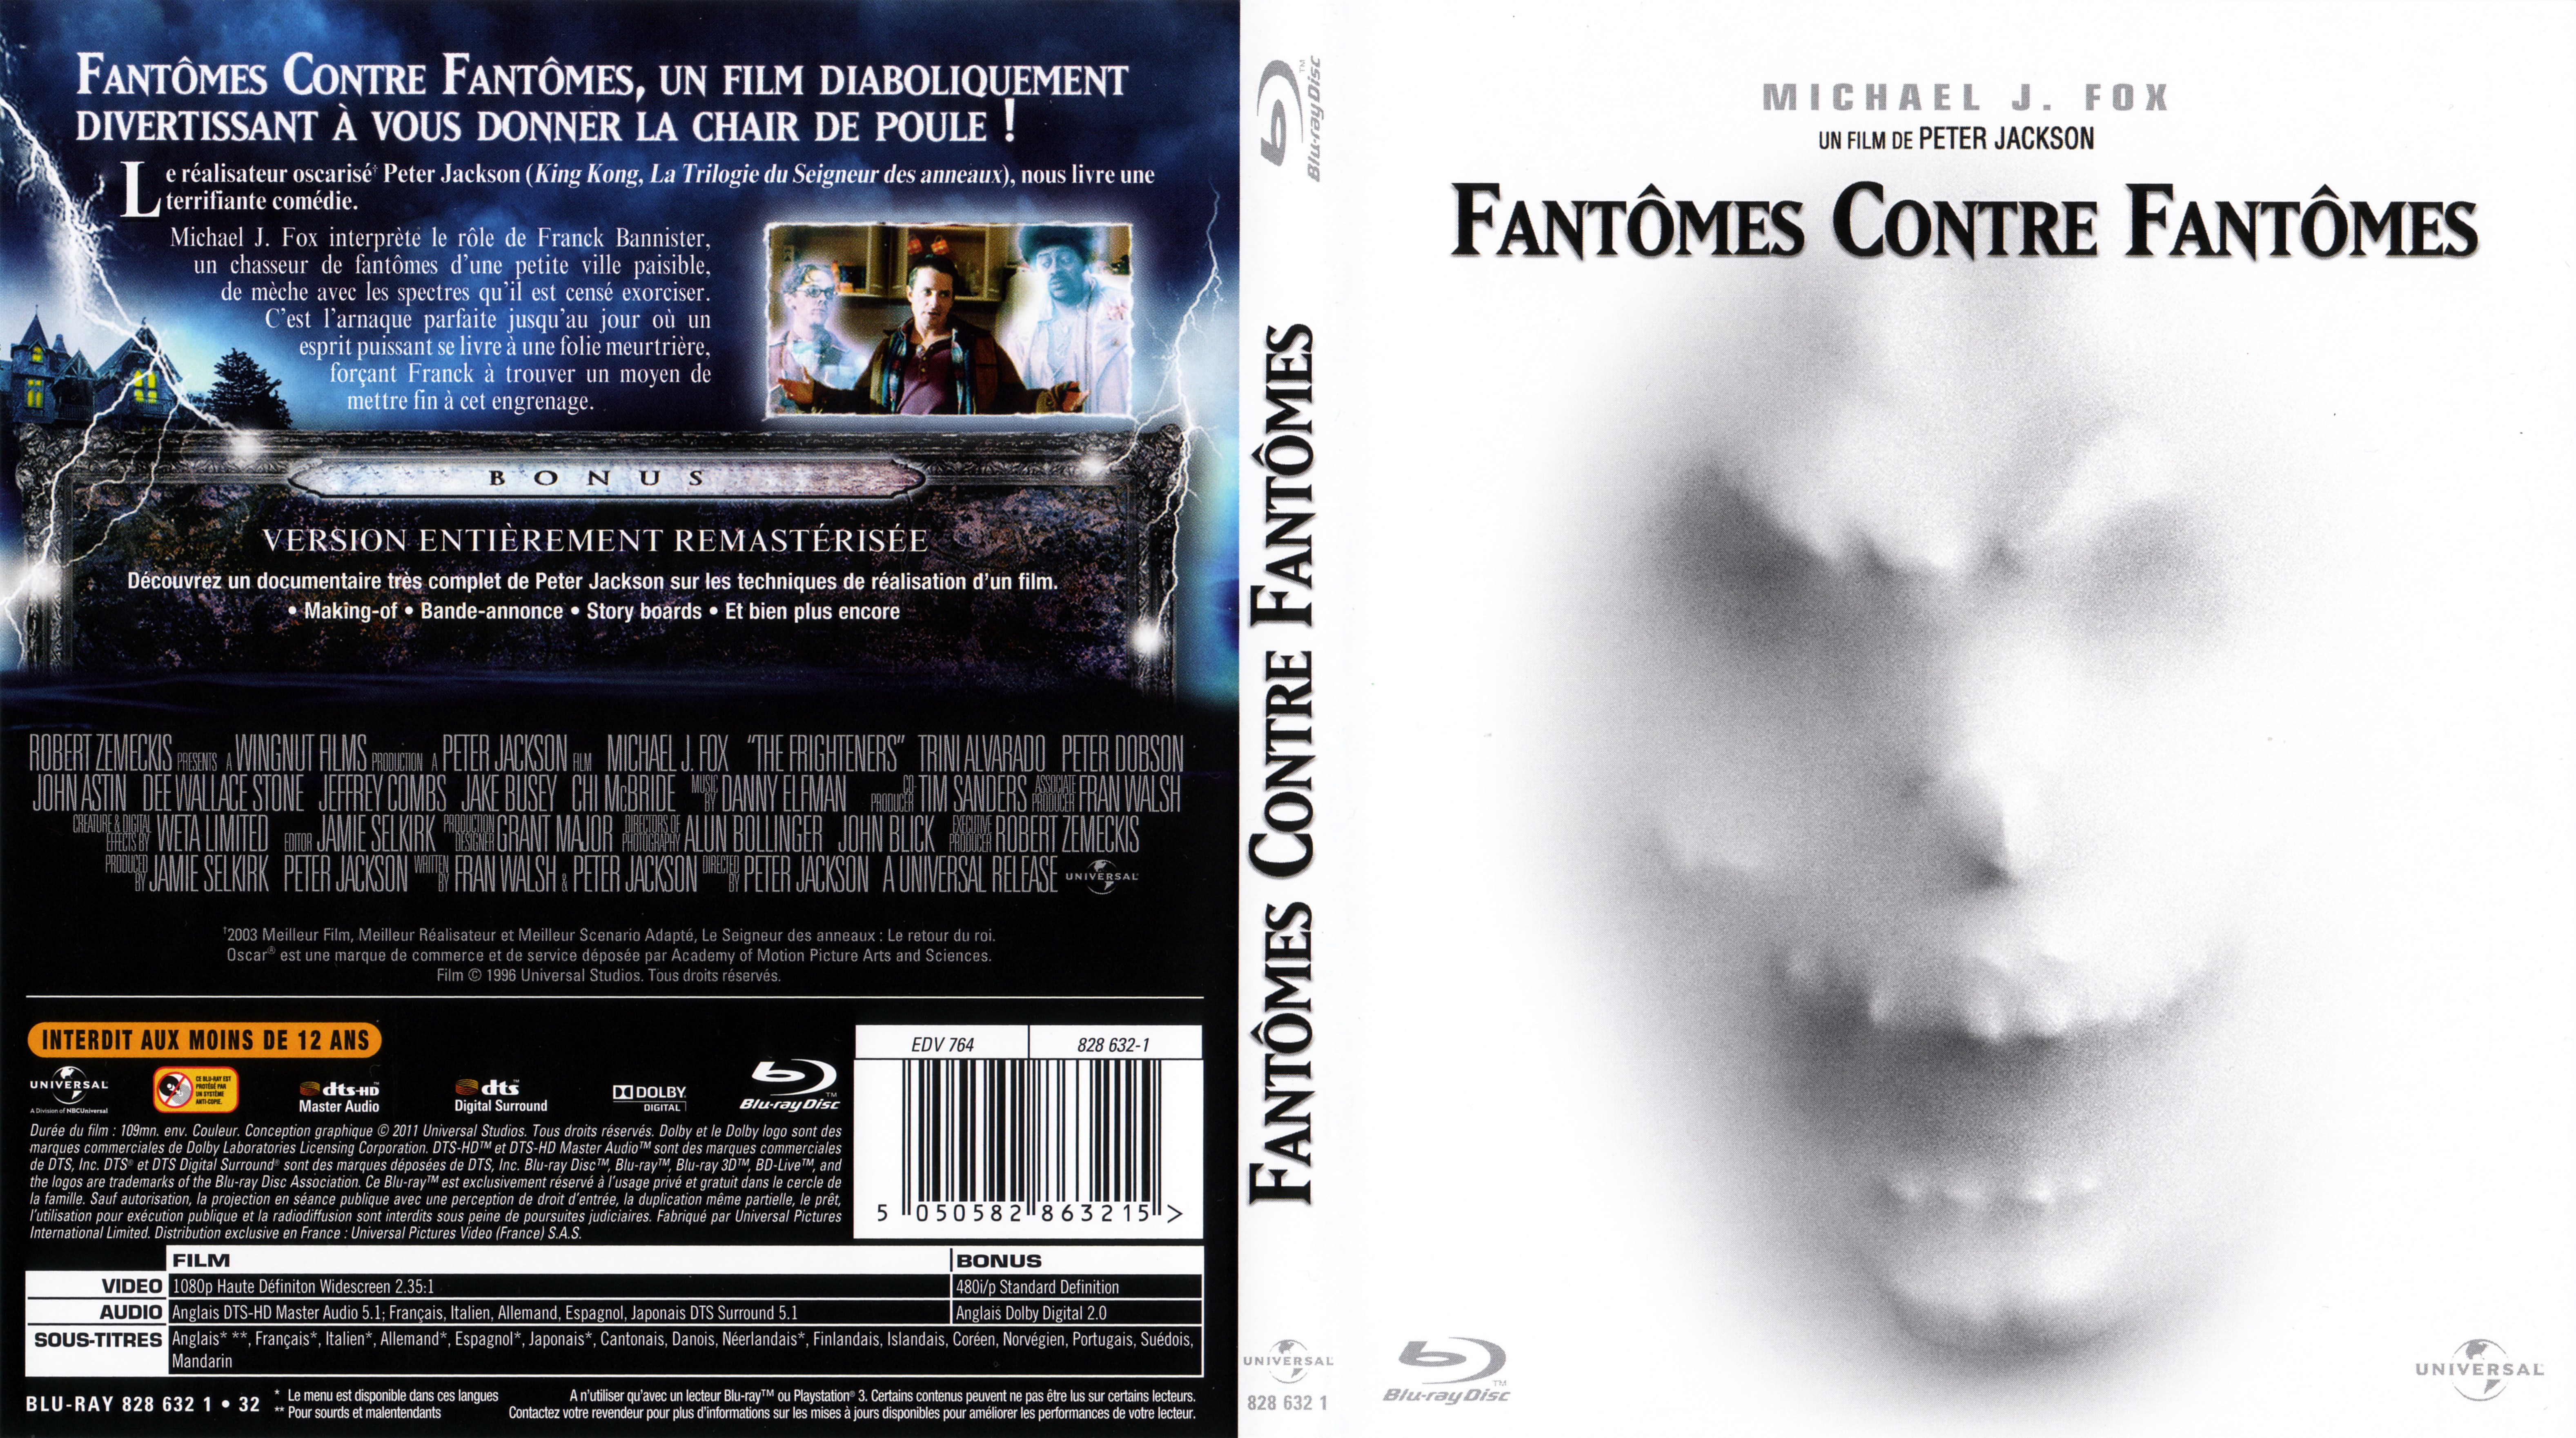 Jaquette DVD Fantmes contre fantmes (BLU-RAY)